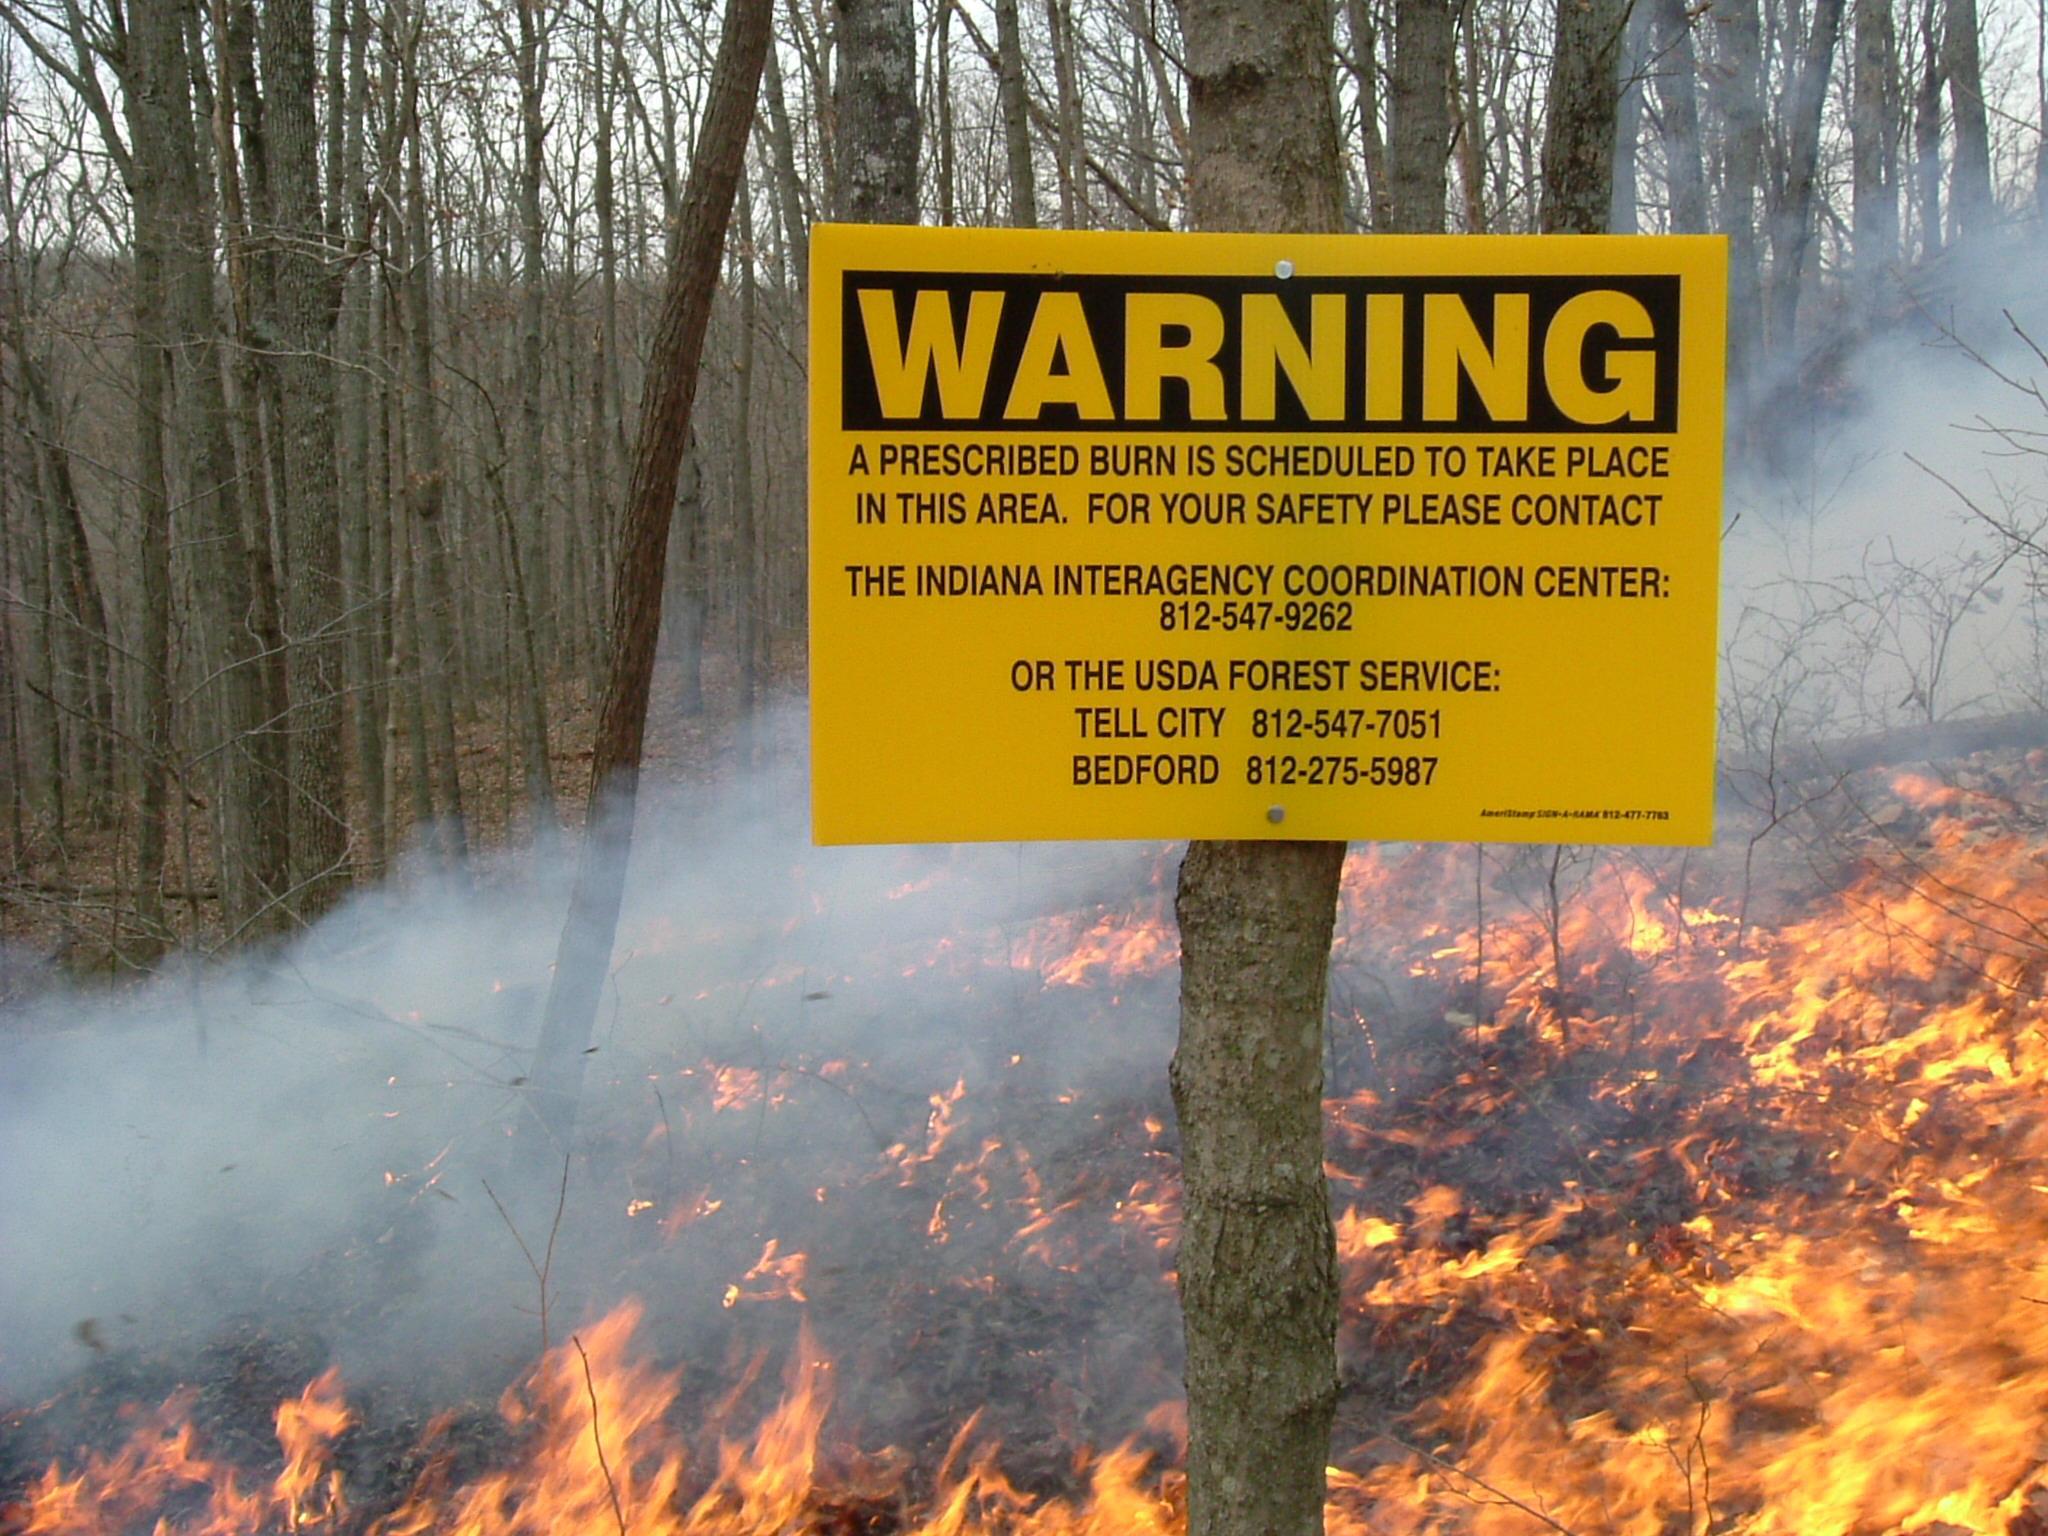 Yellow sign on a tree with flames of the prescribed fire in the background.